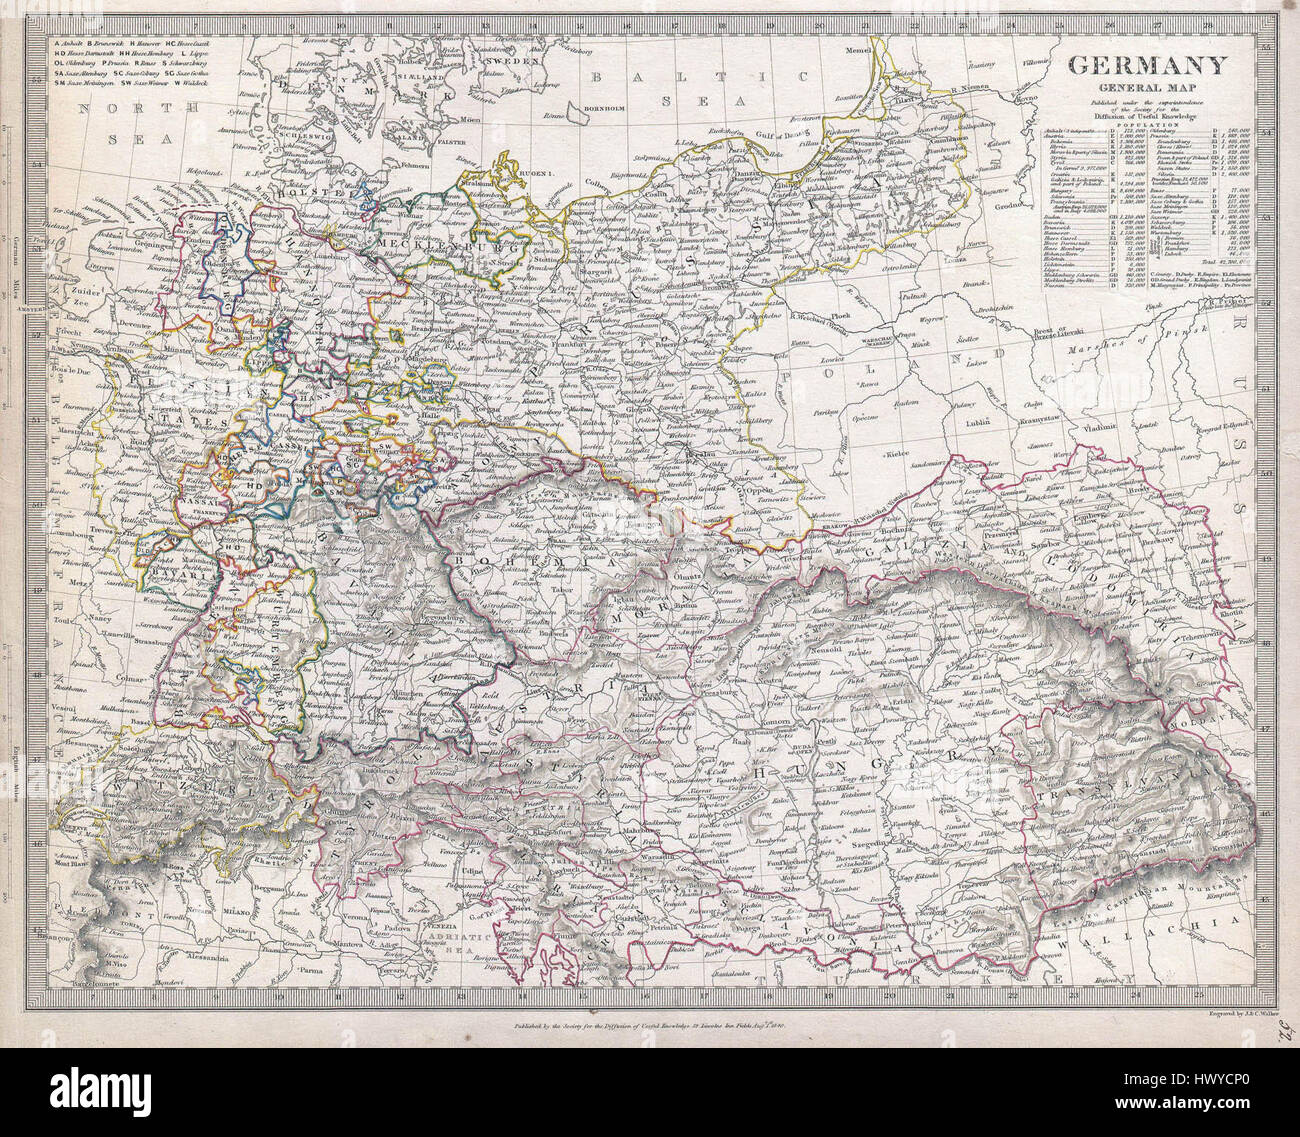 1840 S.D.U.K. Map of Germany   Geographicus   Germany sduk 1840 Stock Photo